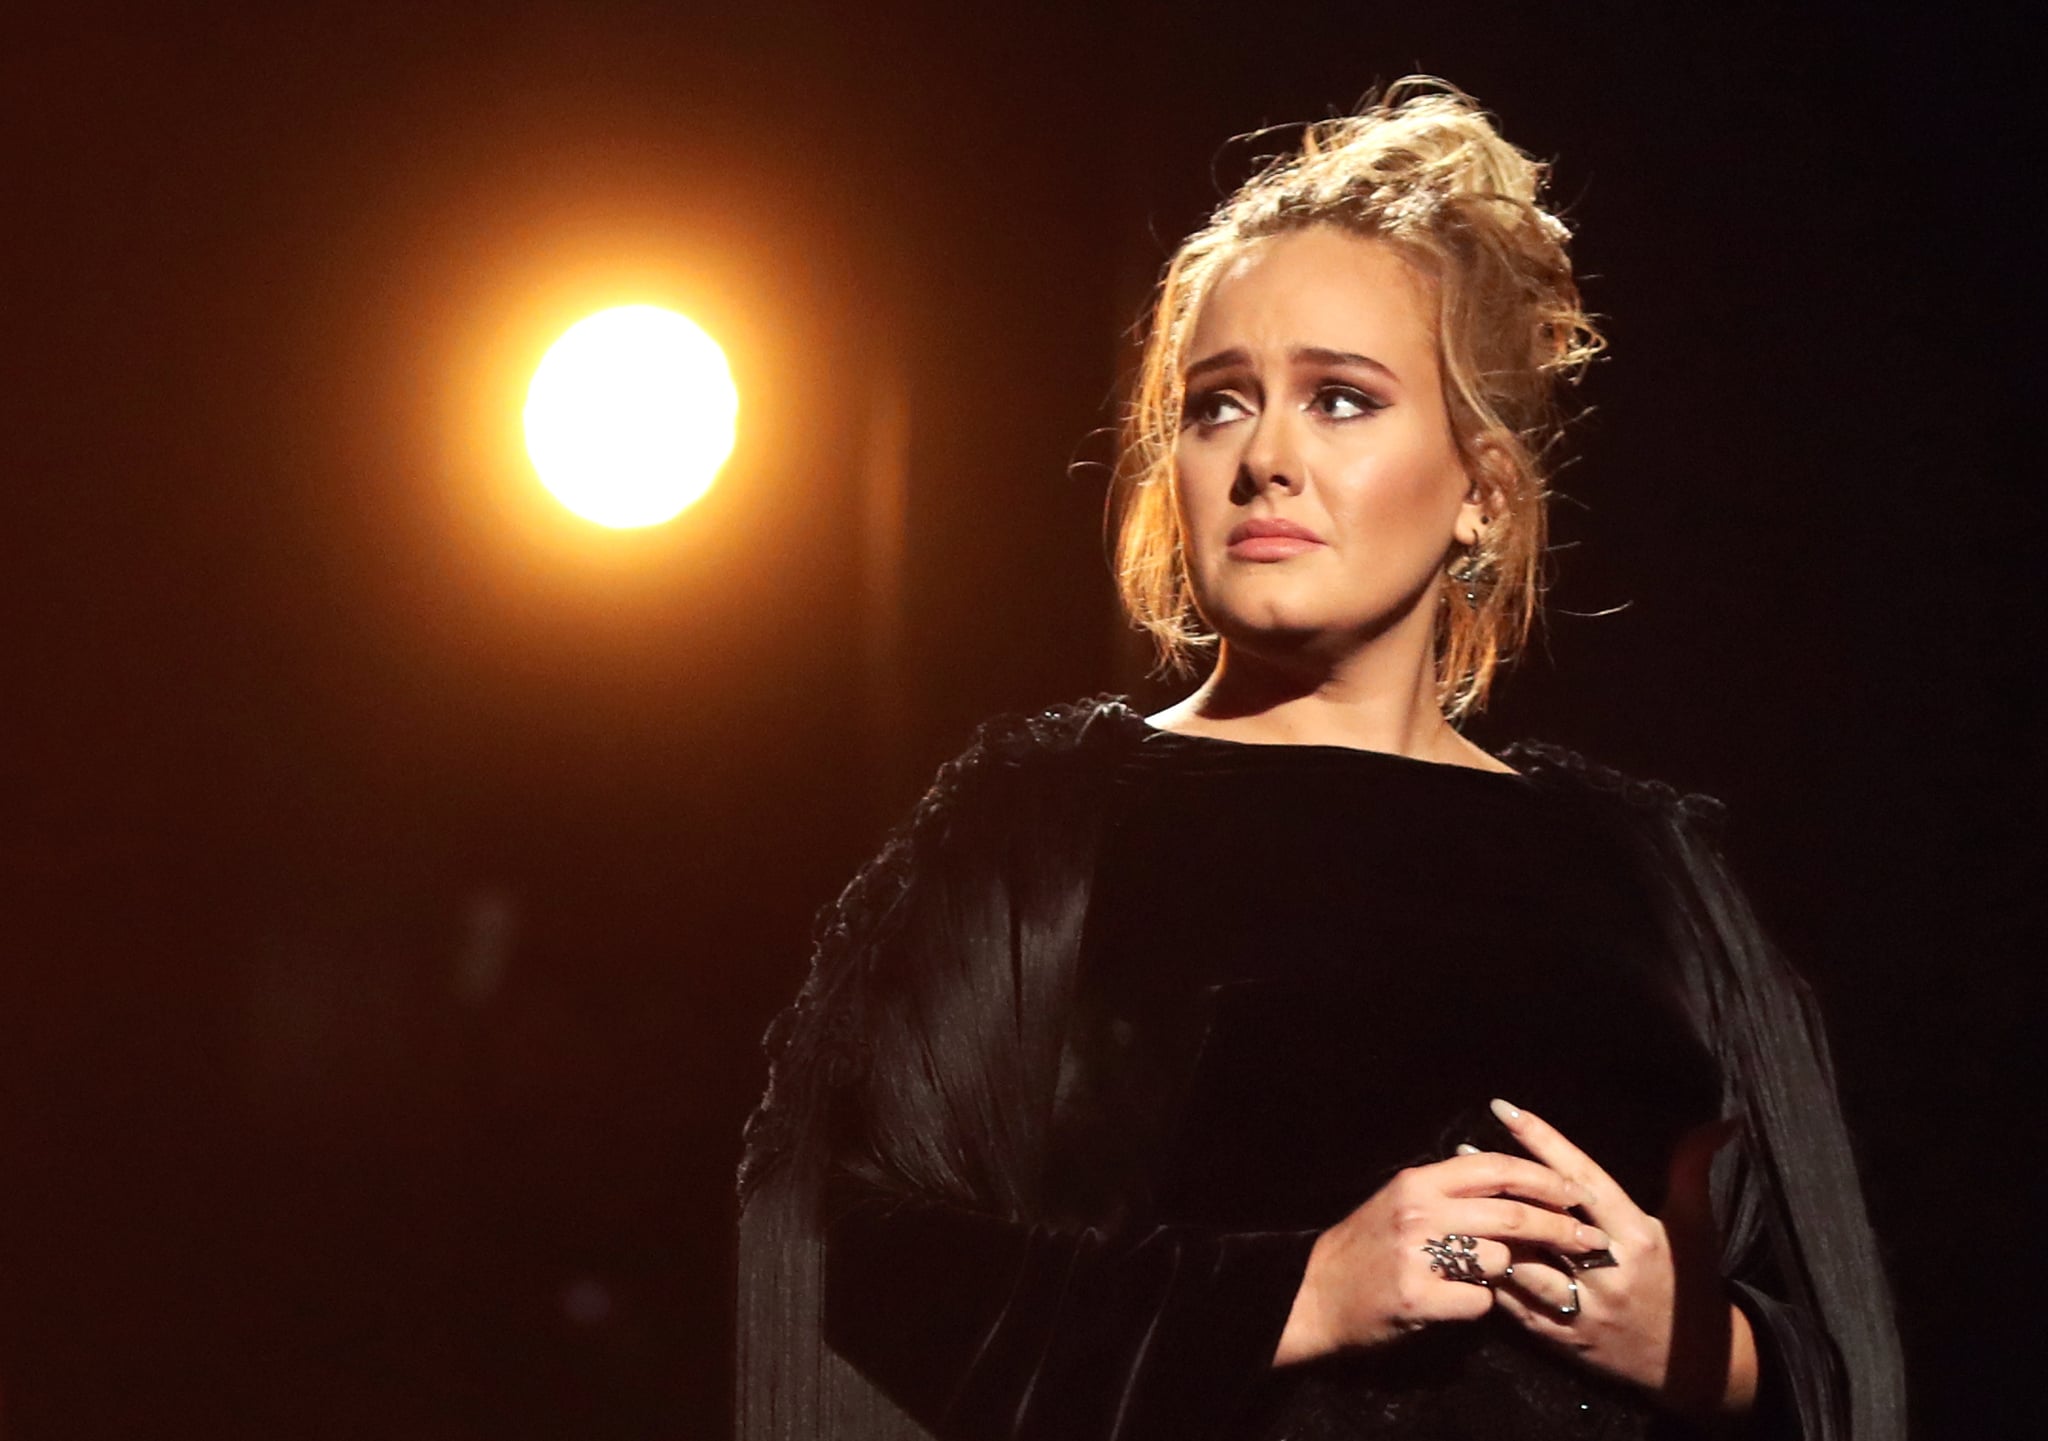 Adele Talking About George Michael at the 2017 Grammy Awards | POPSUGAR Entertainment